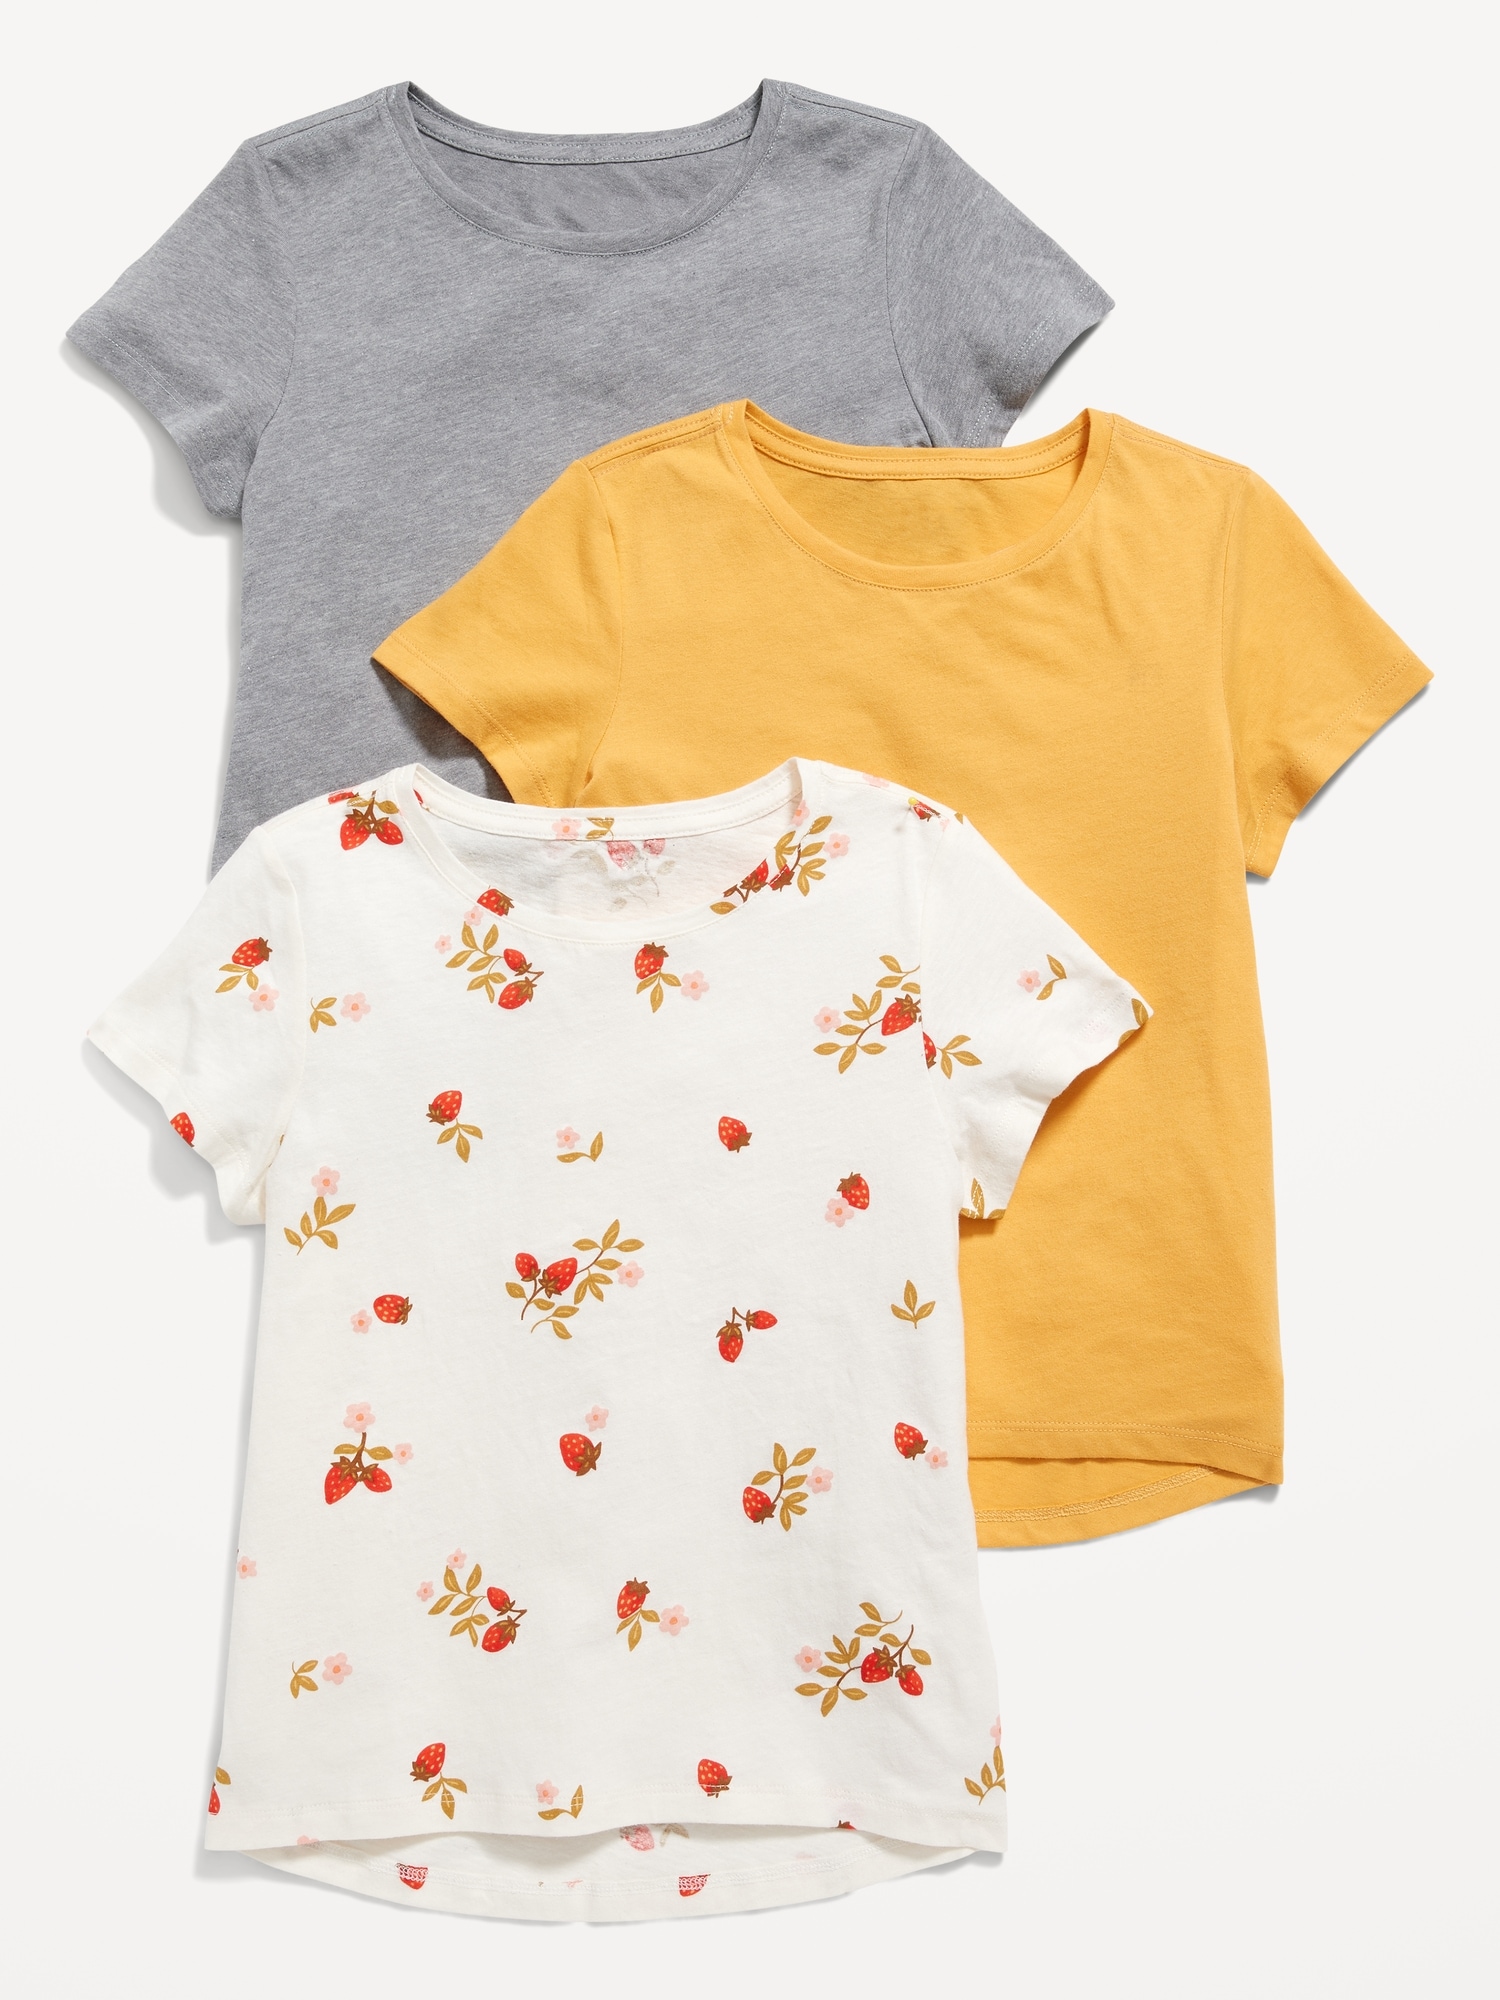 Old Navy Softest Printed T-Shirt 3-Pack for Girls yellow. 1